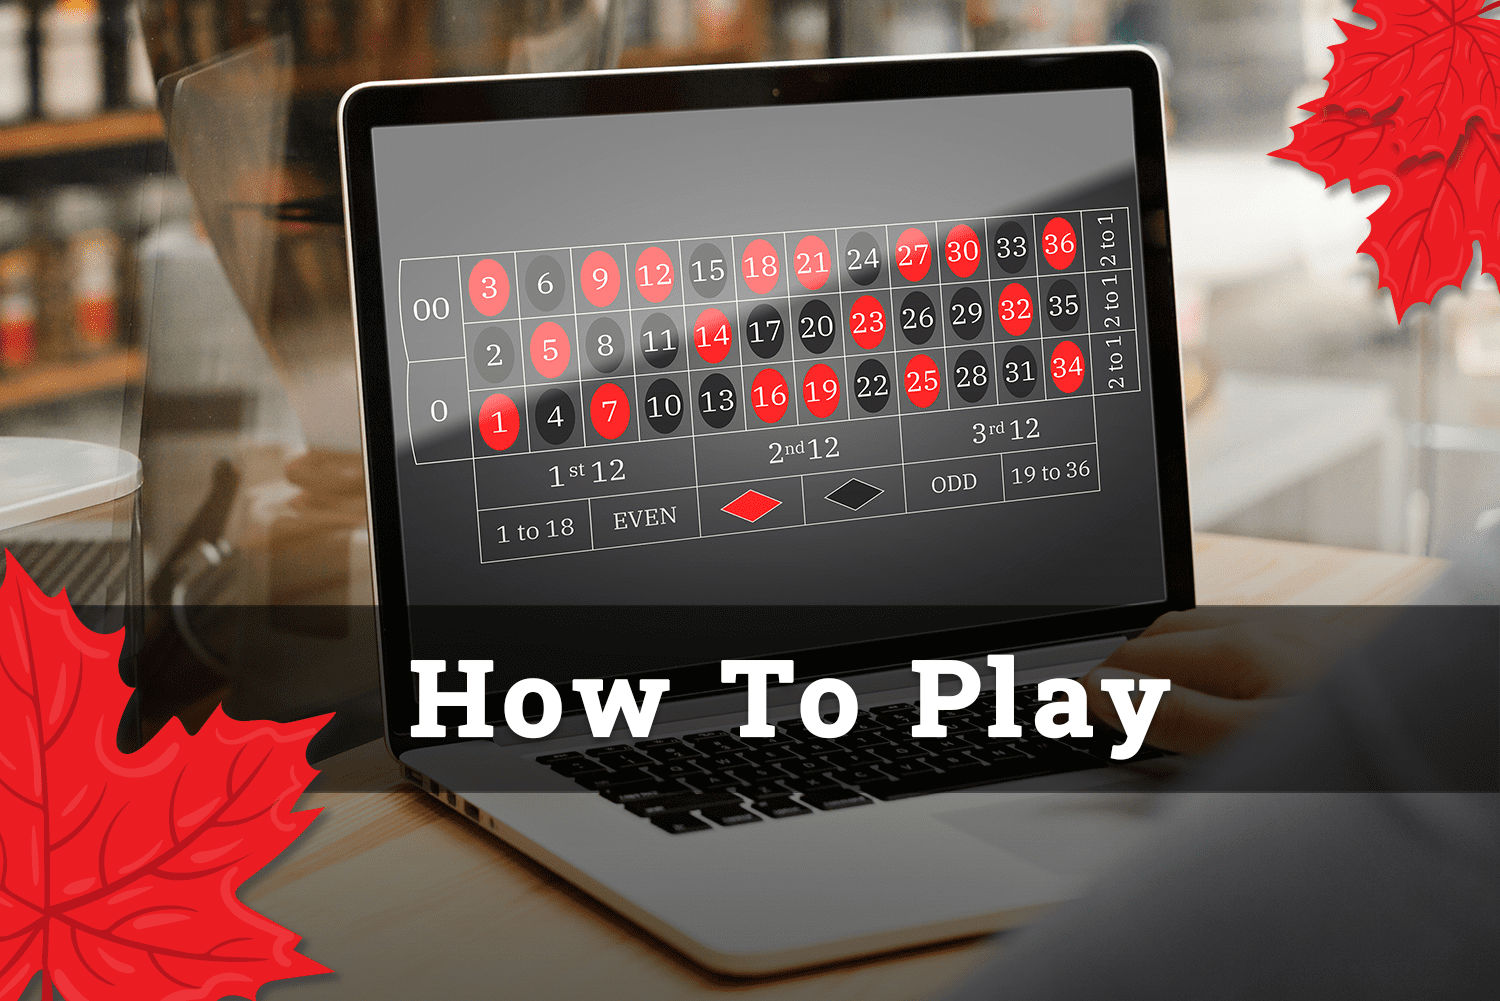 How to play roulette eimaprp